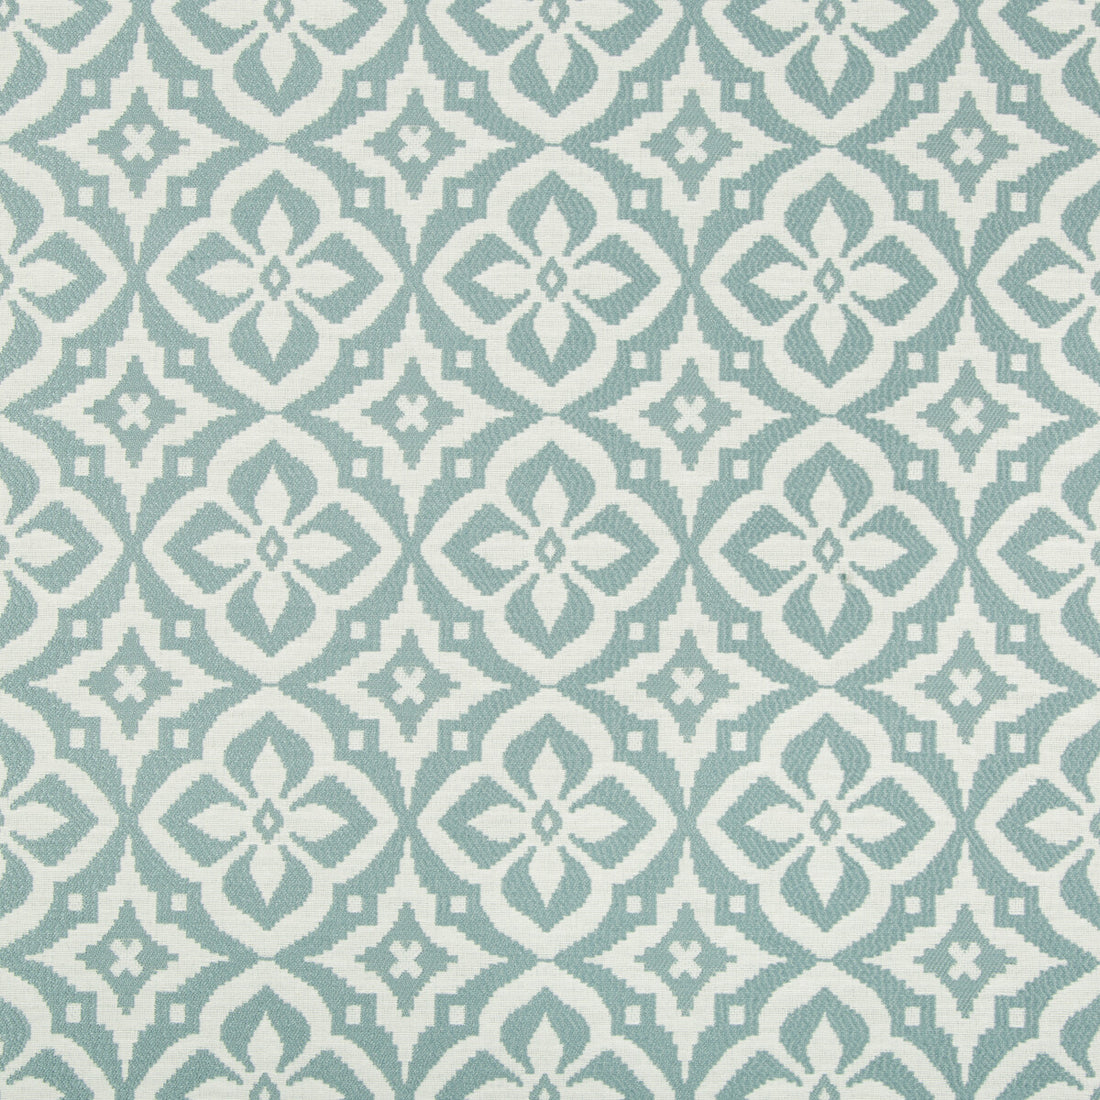 Kravet Design fabric in 34703-15 color - pattern 34703.15.0 - by Kravet Design in the Crypton Home collection